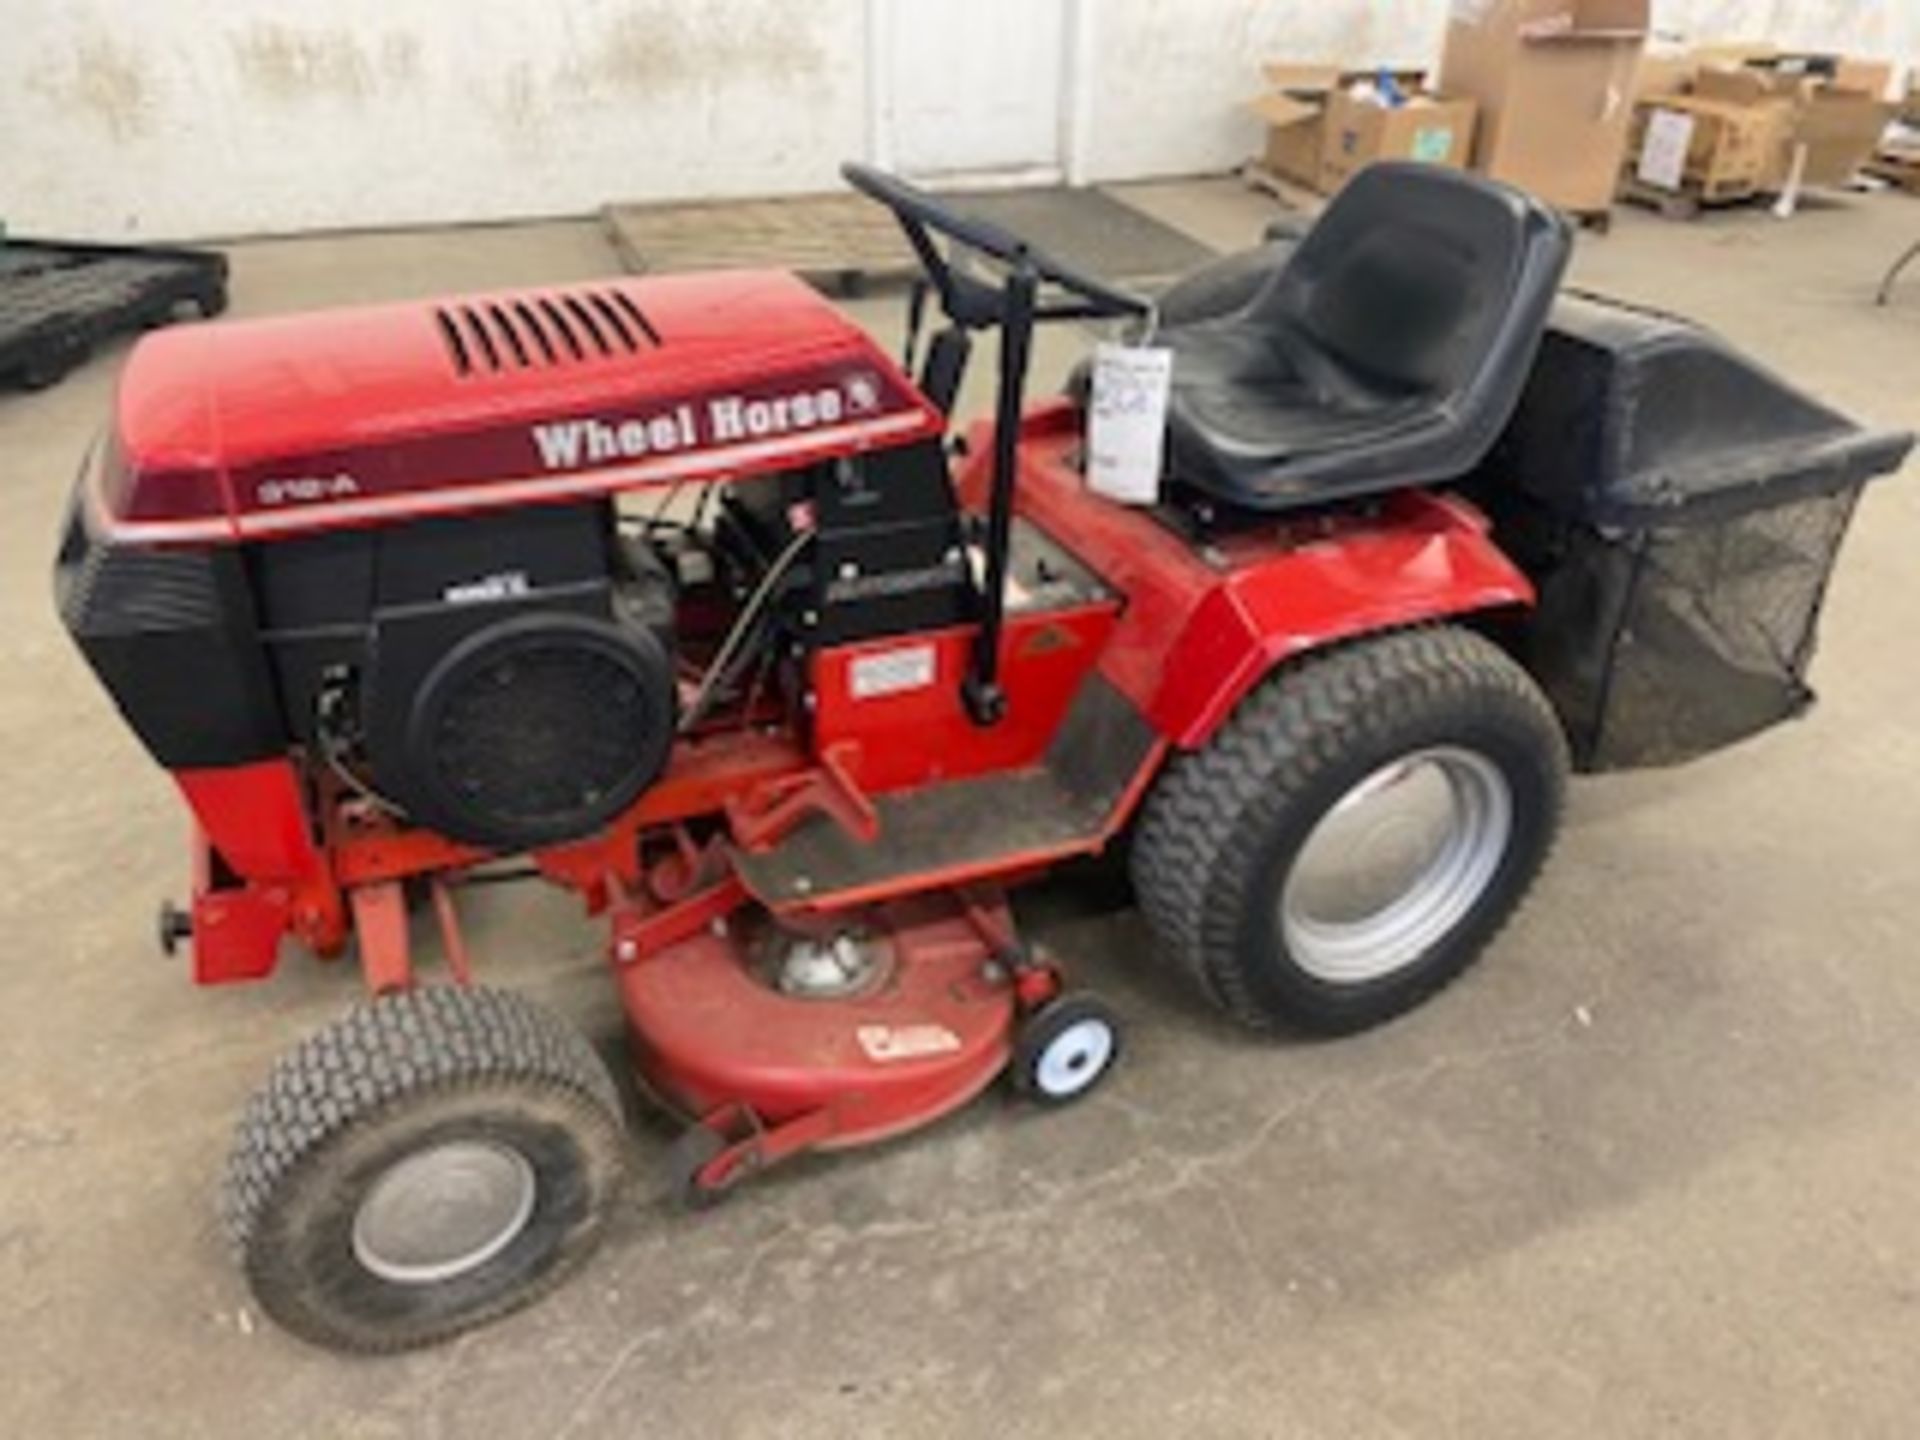 WHEEL HORSE RIDING LAWN MOWER, MODEL 312-A WITH DECK AND BAGGER